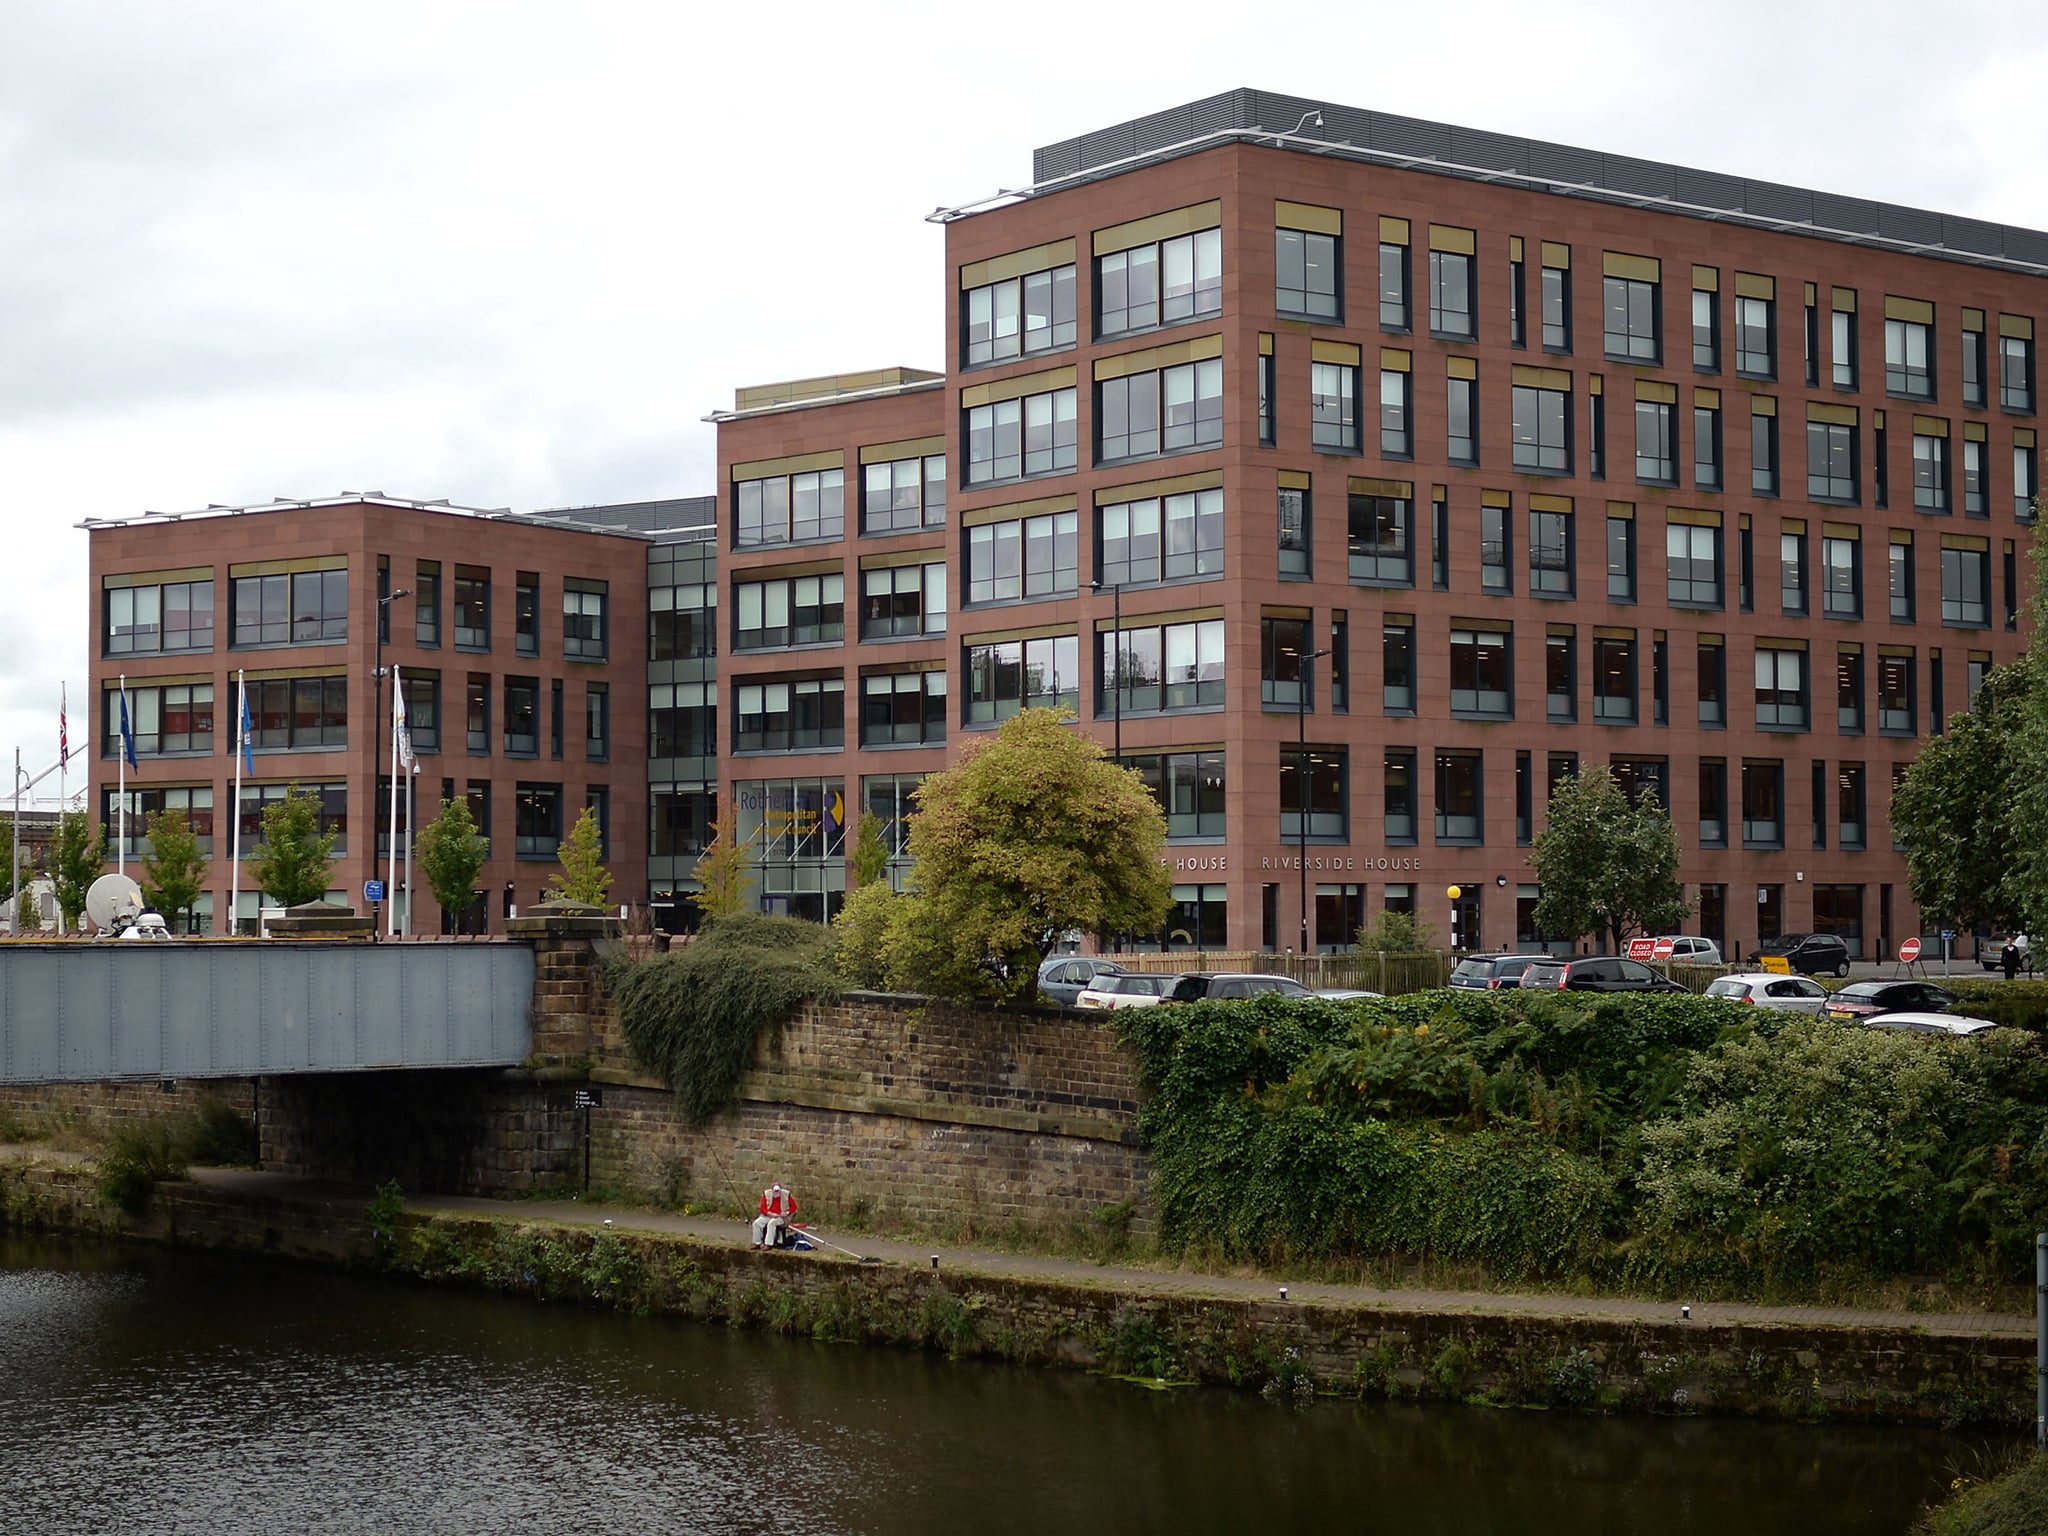 The council offices in Rotherham are housed in Riverside House. Control of all services will be returned to the council, including children’s social care